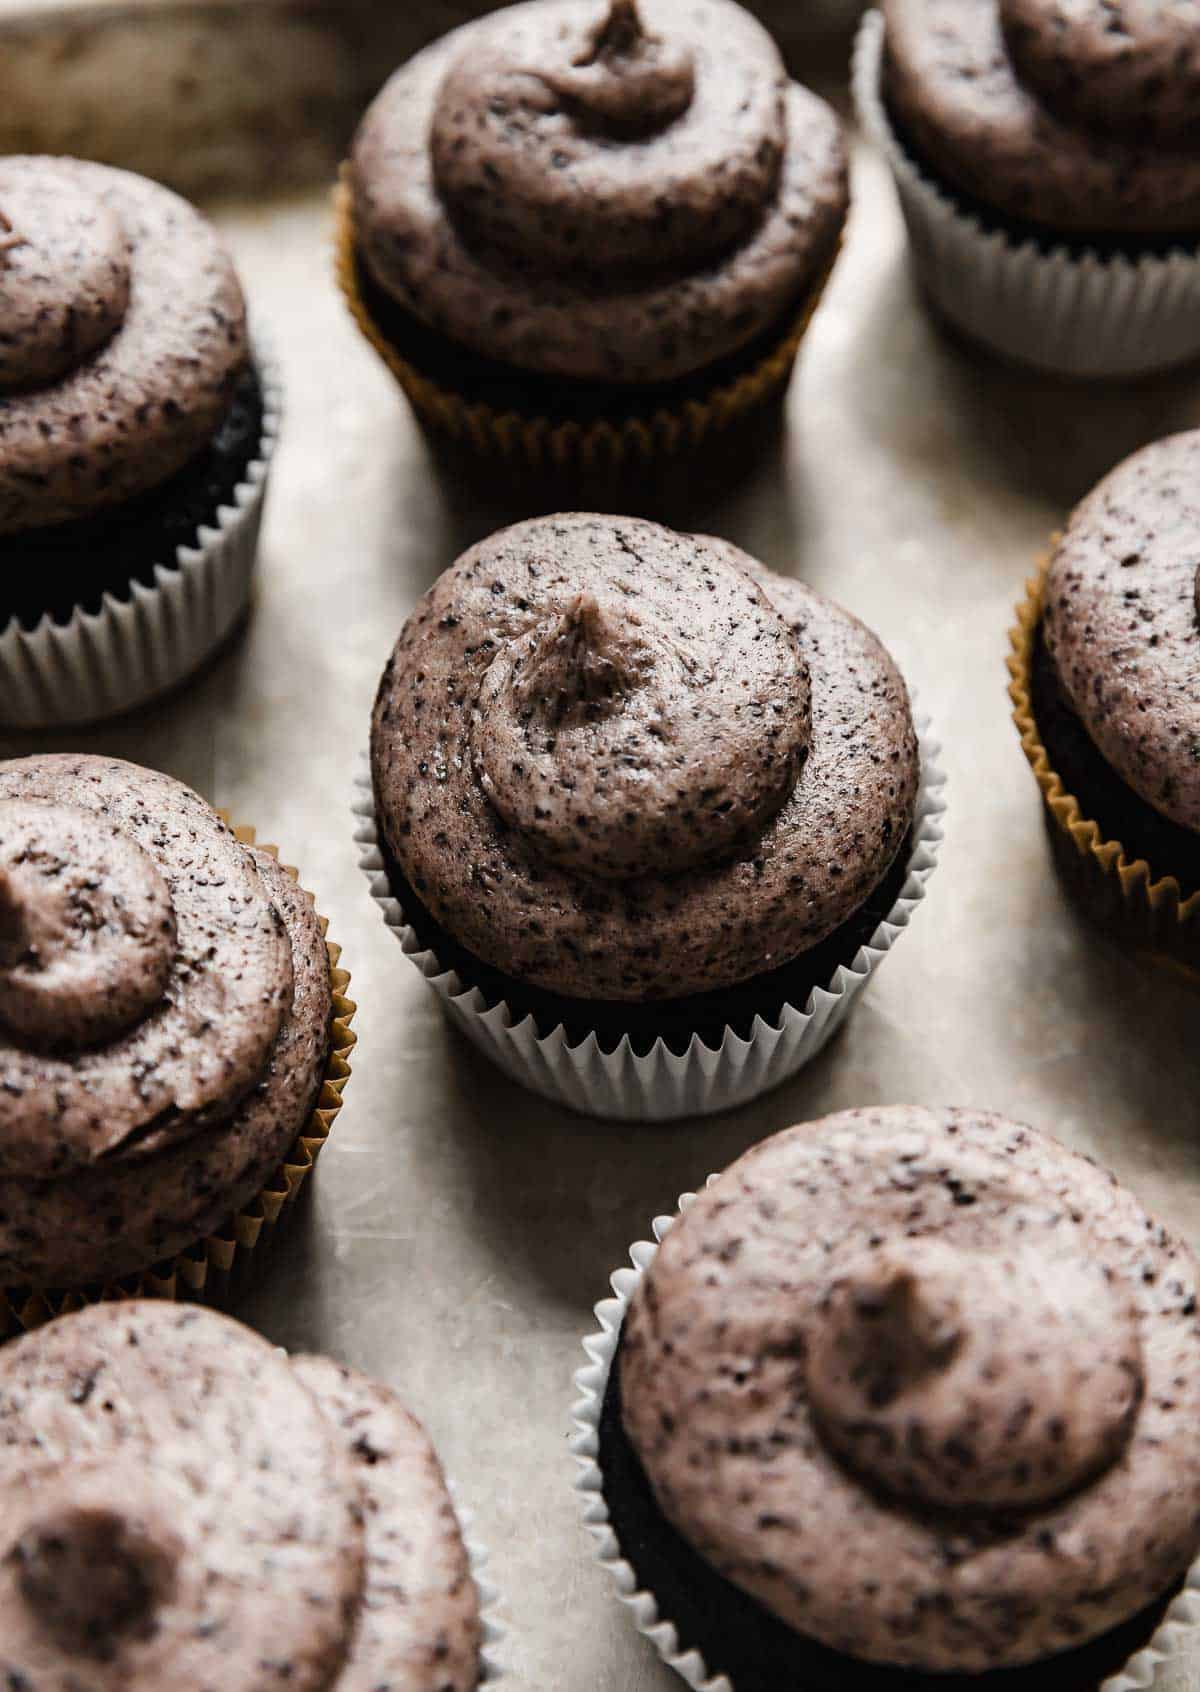 Oreo Frosting swirled on top of a black cupcake.